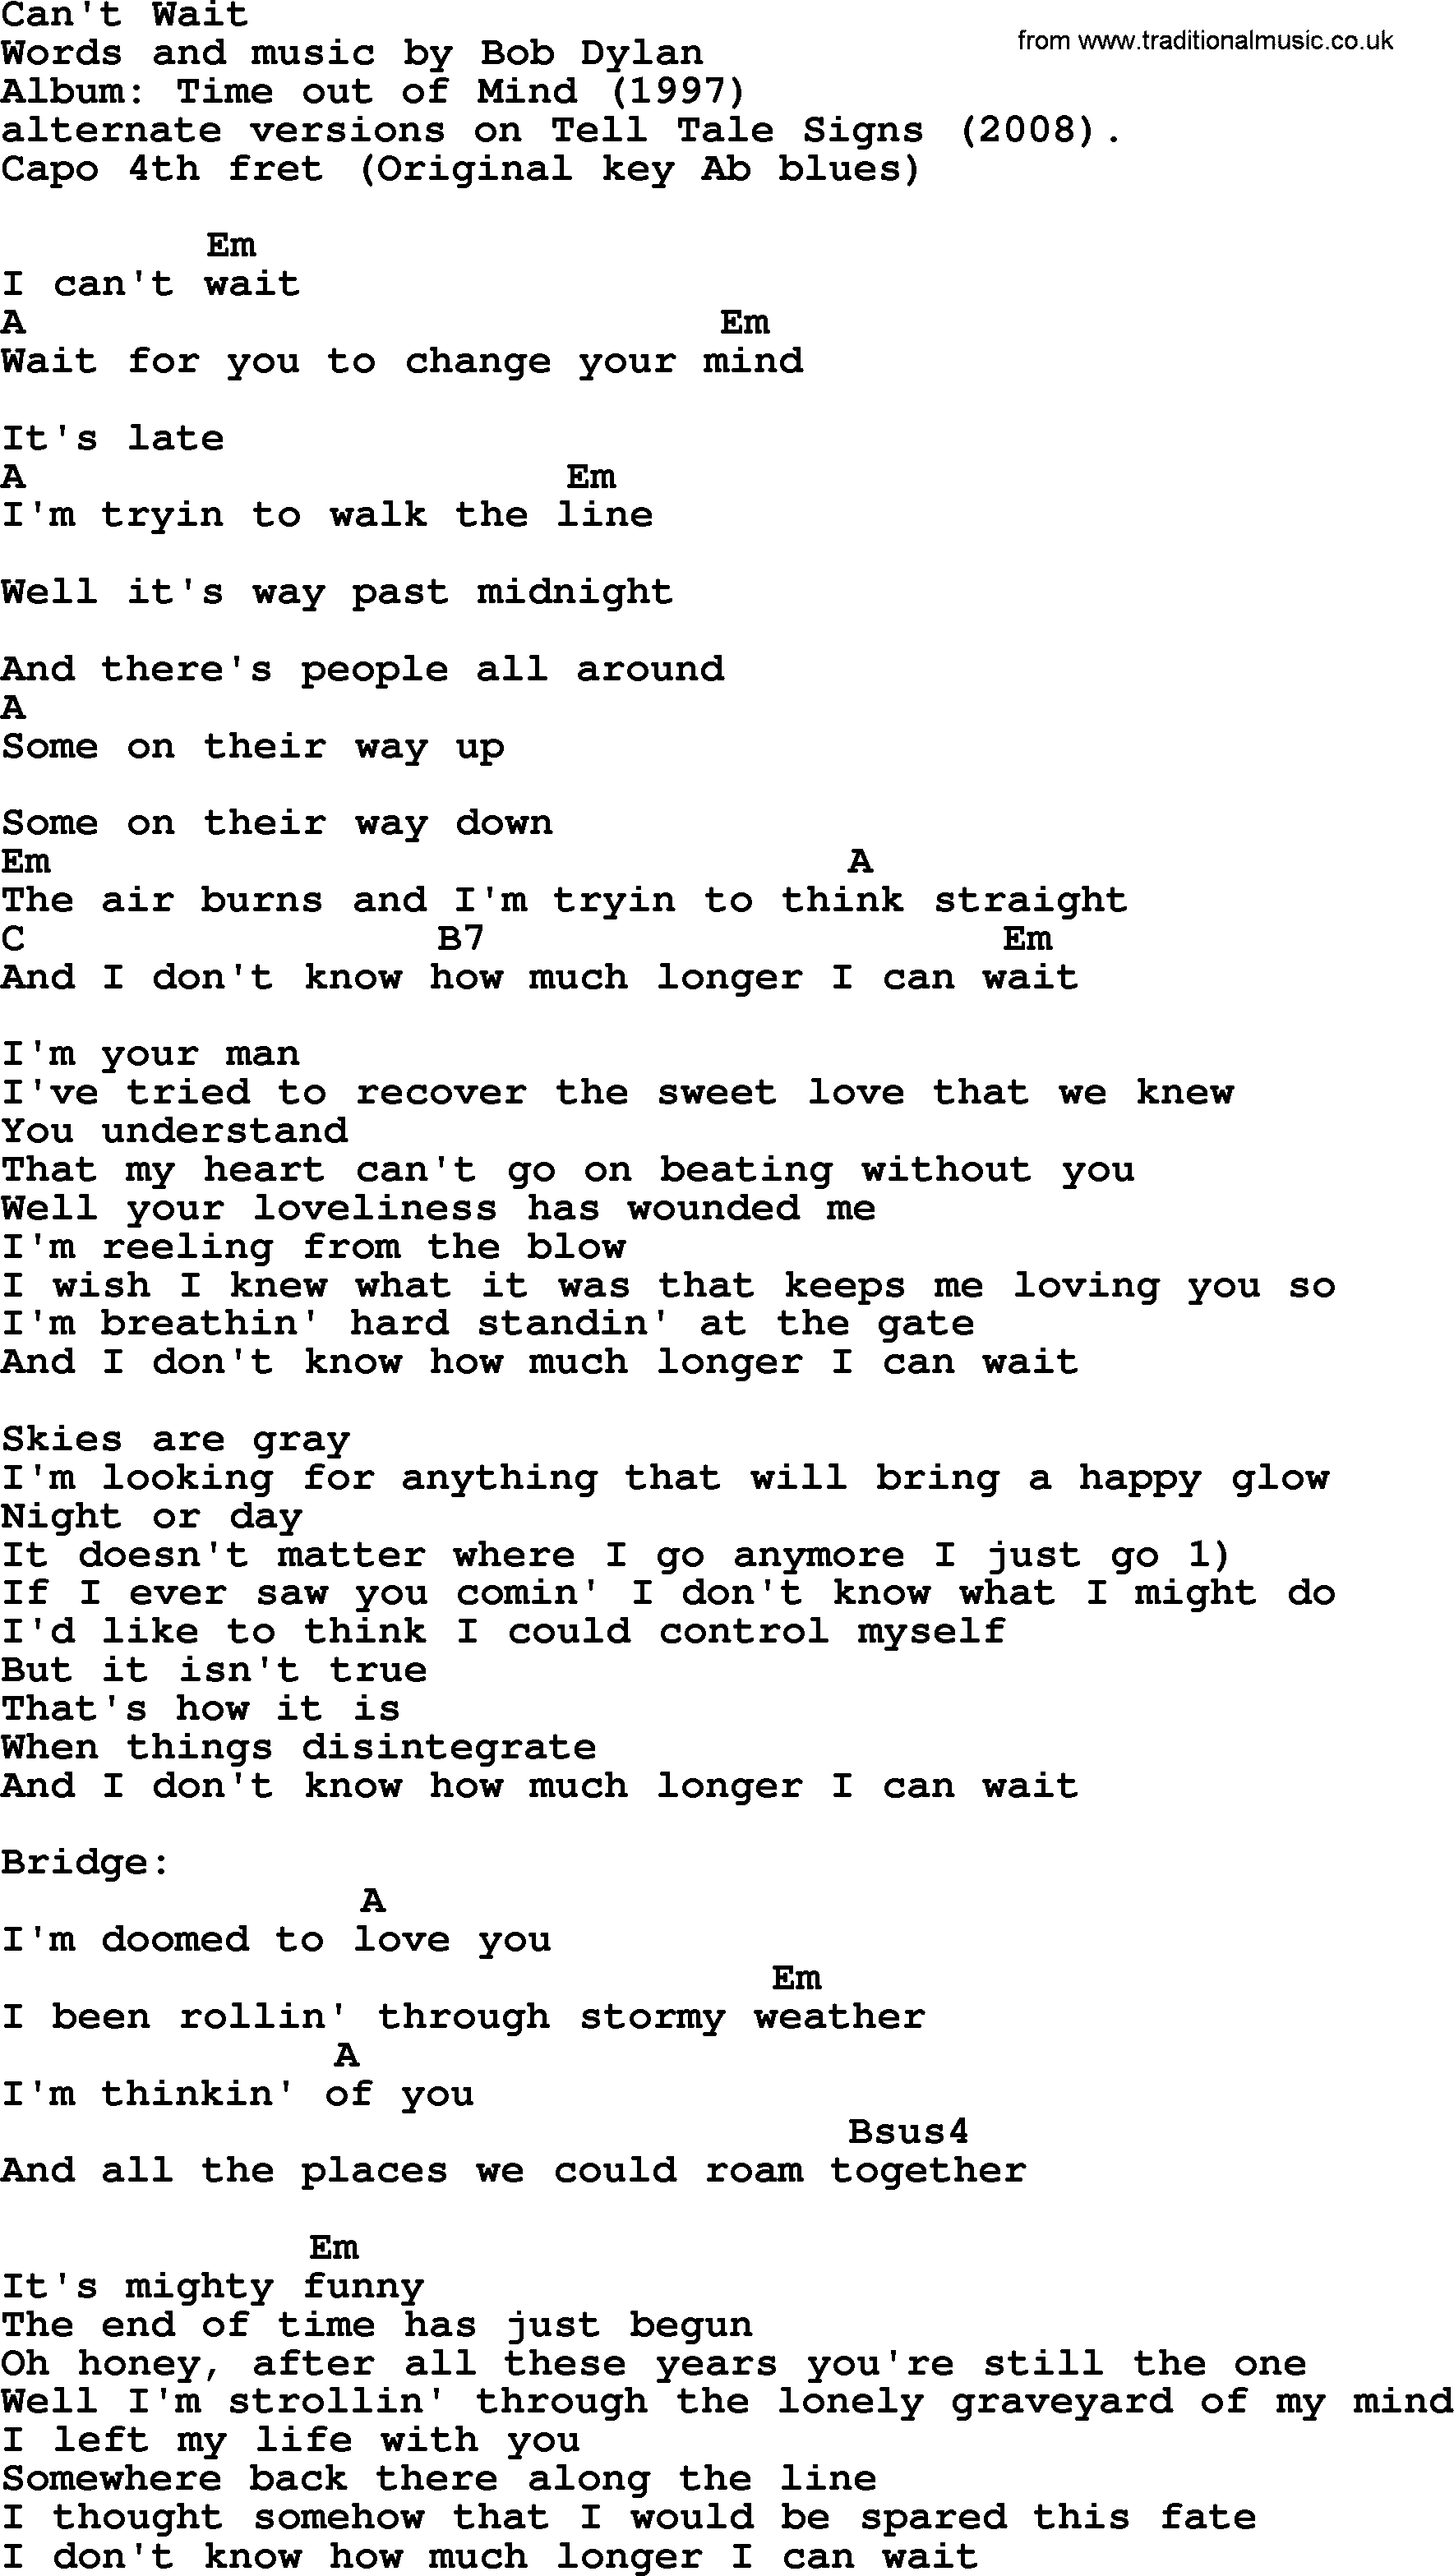 Bob Dylan song, lyrics with chords - Can't Wait